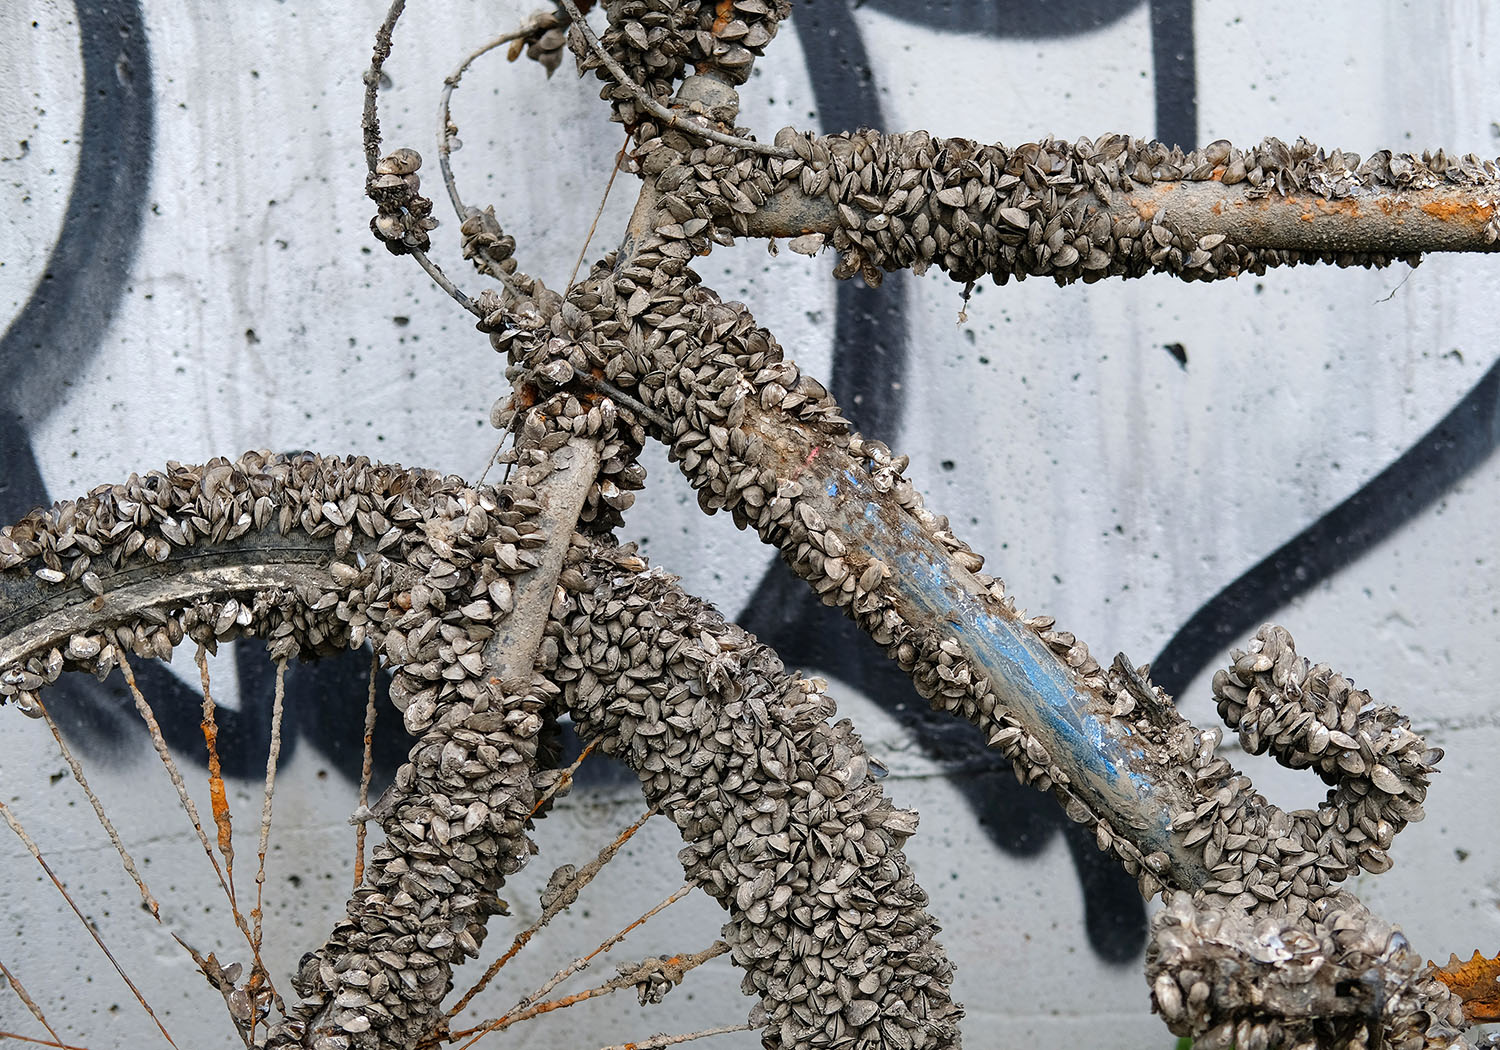 A dredged bicycle covered in zebra mussels.